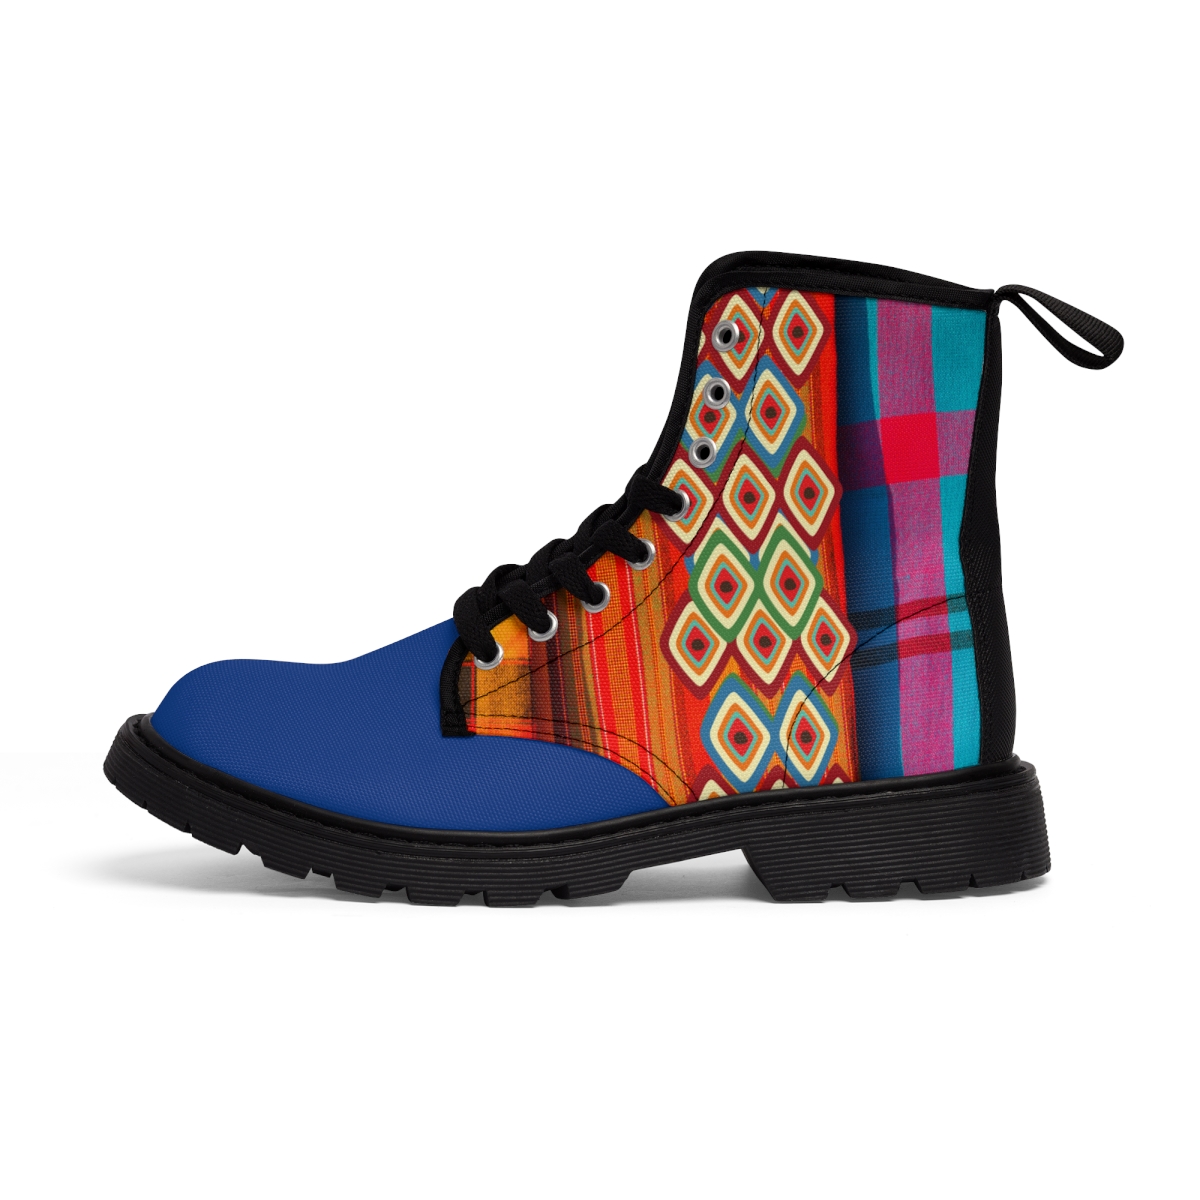 Women's Canvas Boots product thumbnail image